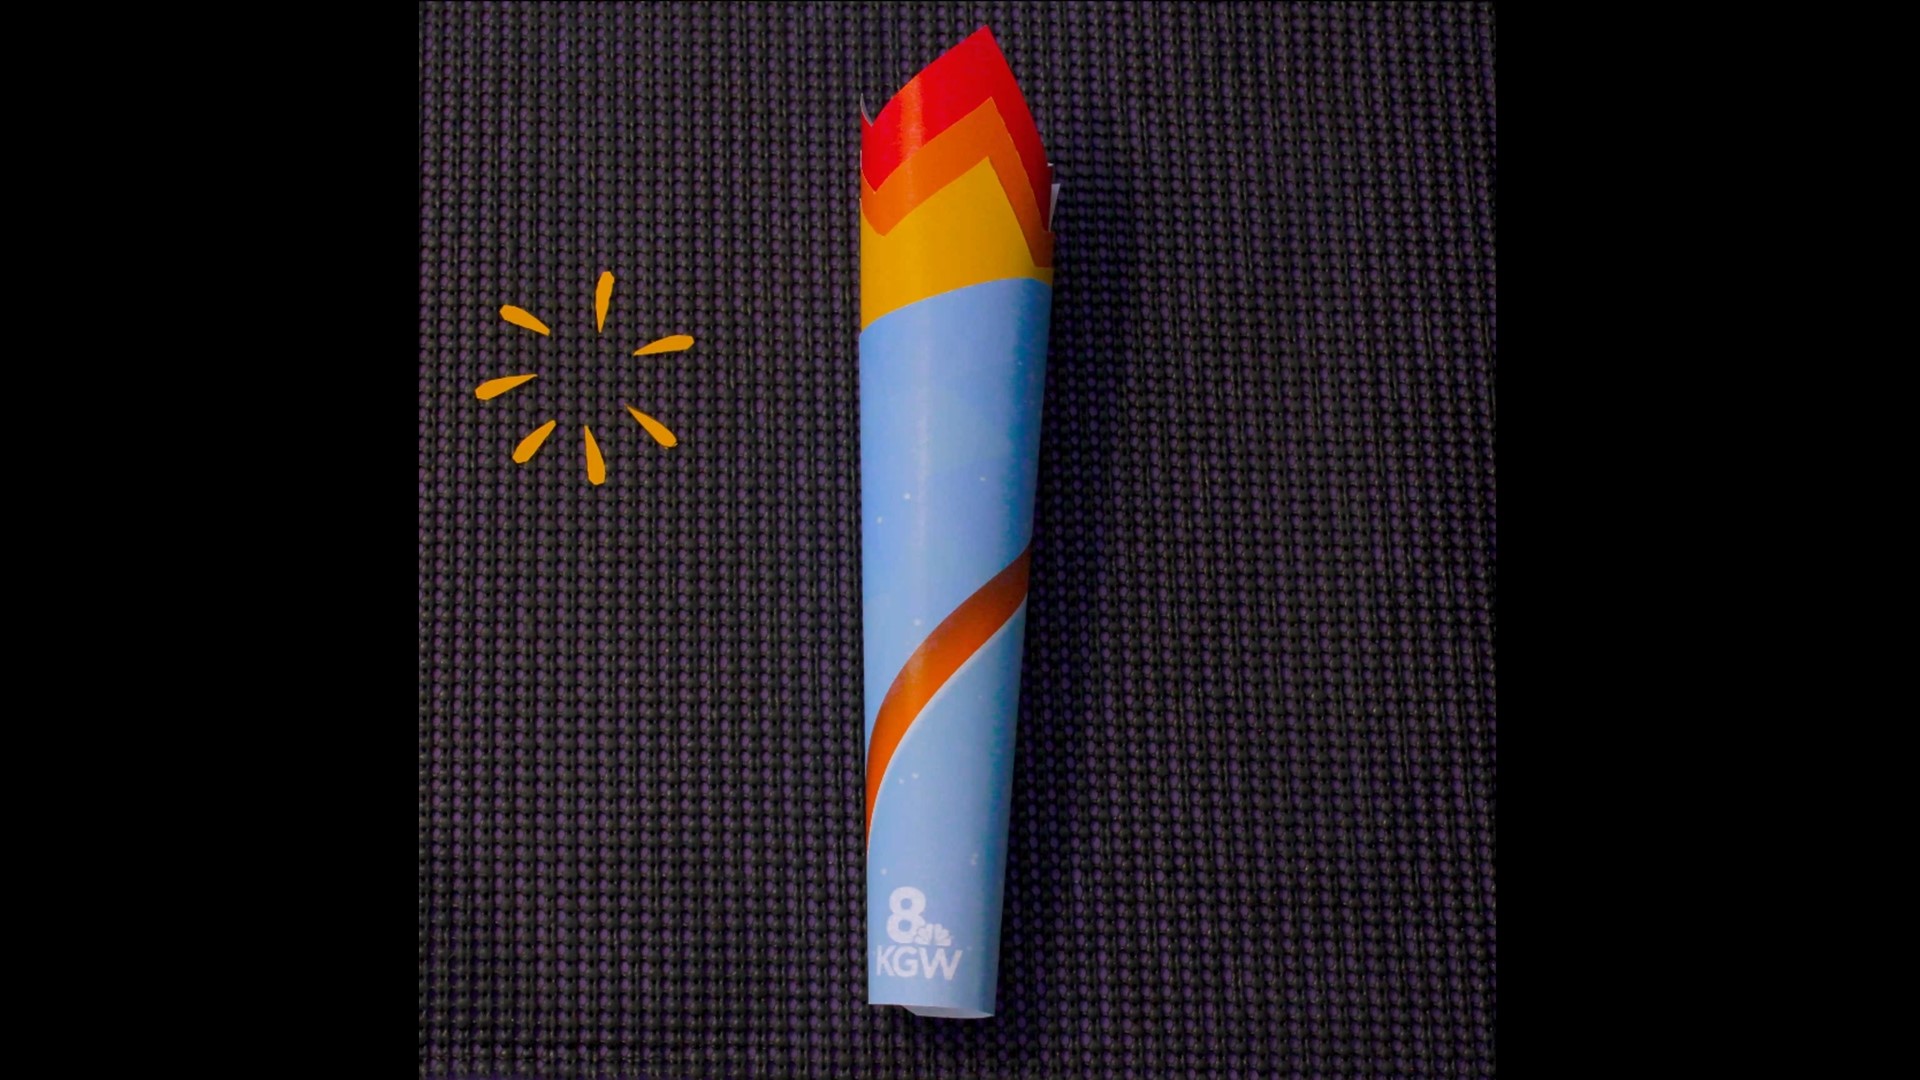 Follow a few simple steps to create your own torch, then share your creations with us by using #KGWOlympics